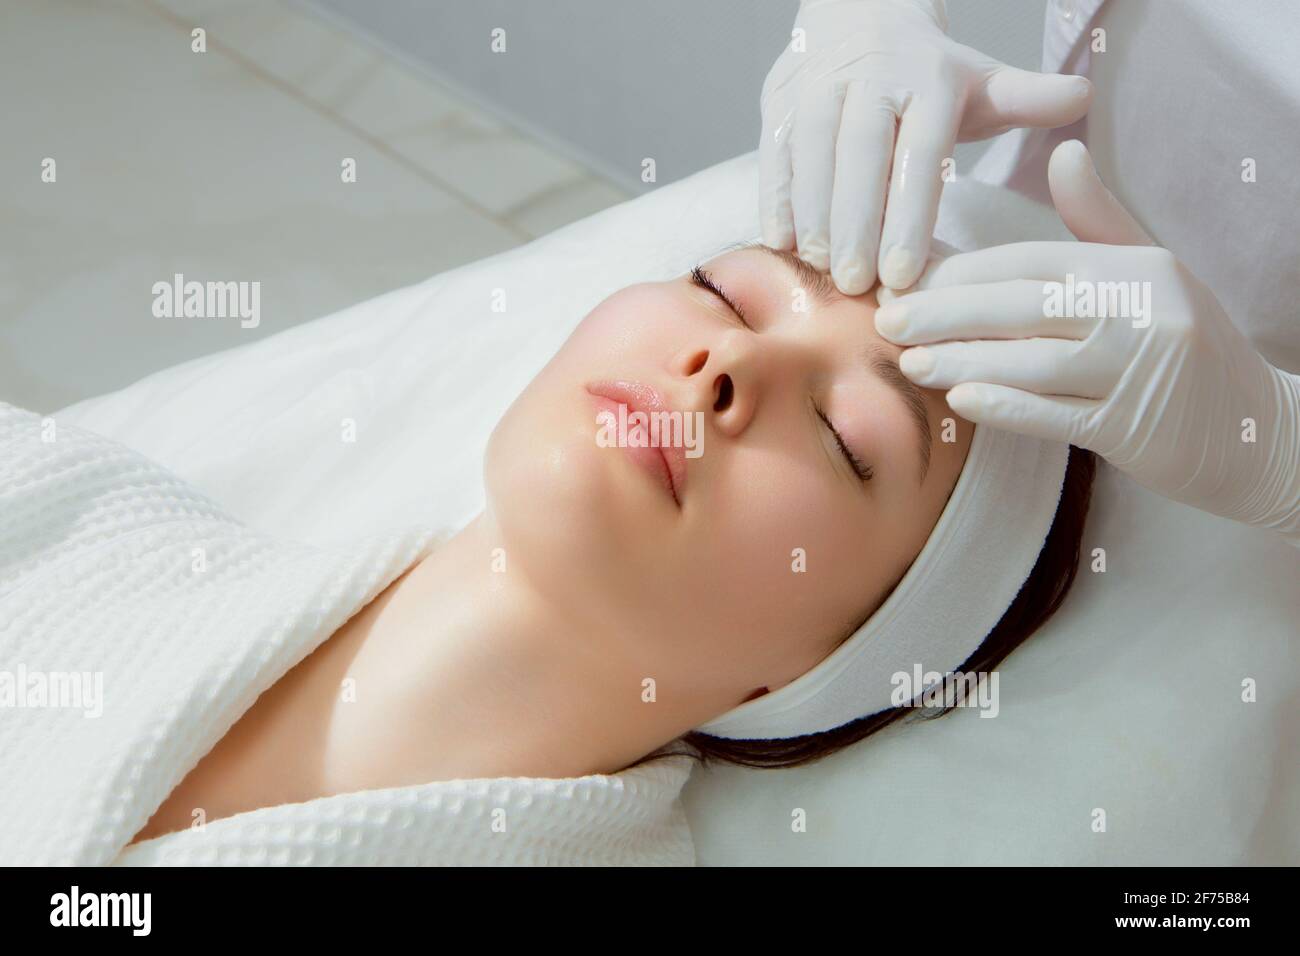 A young woman with perfect skin gets a facial massage at a cosmetology clinic Stock Photo